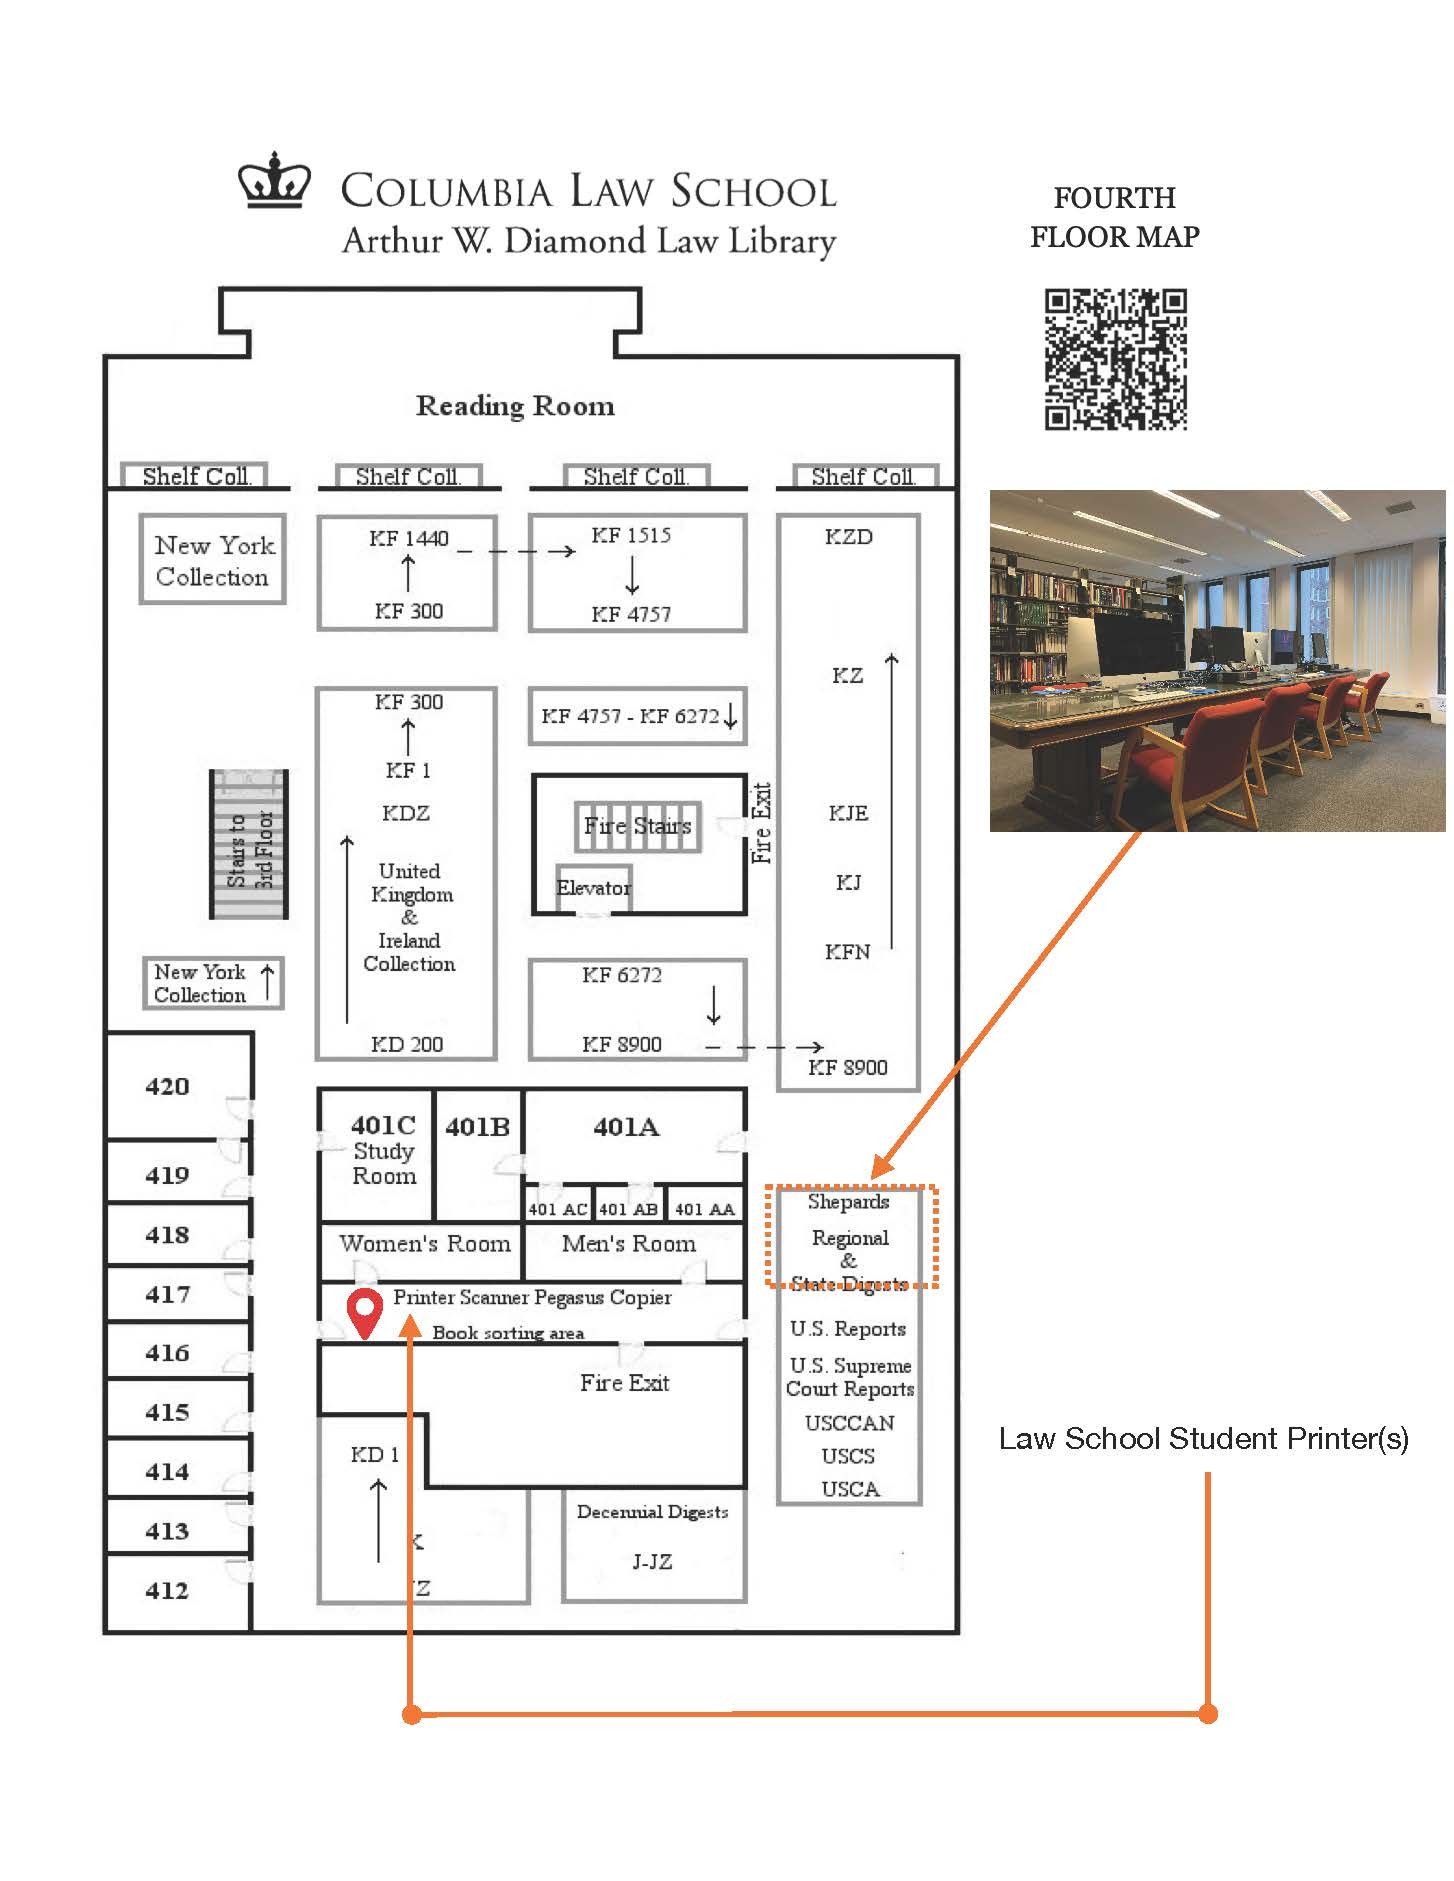 Map of 2nd floor student printers